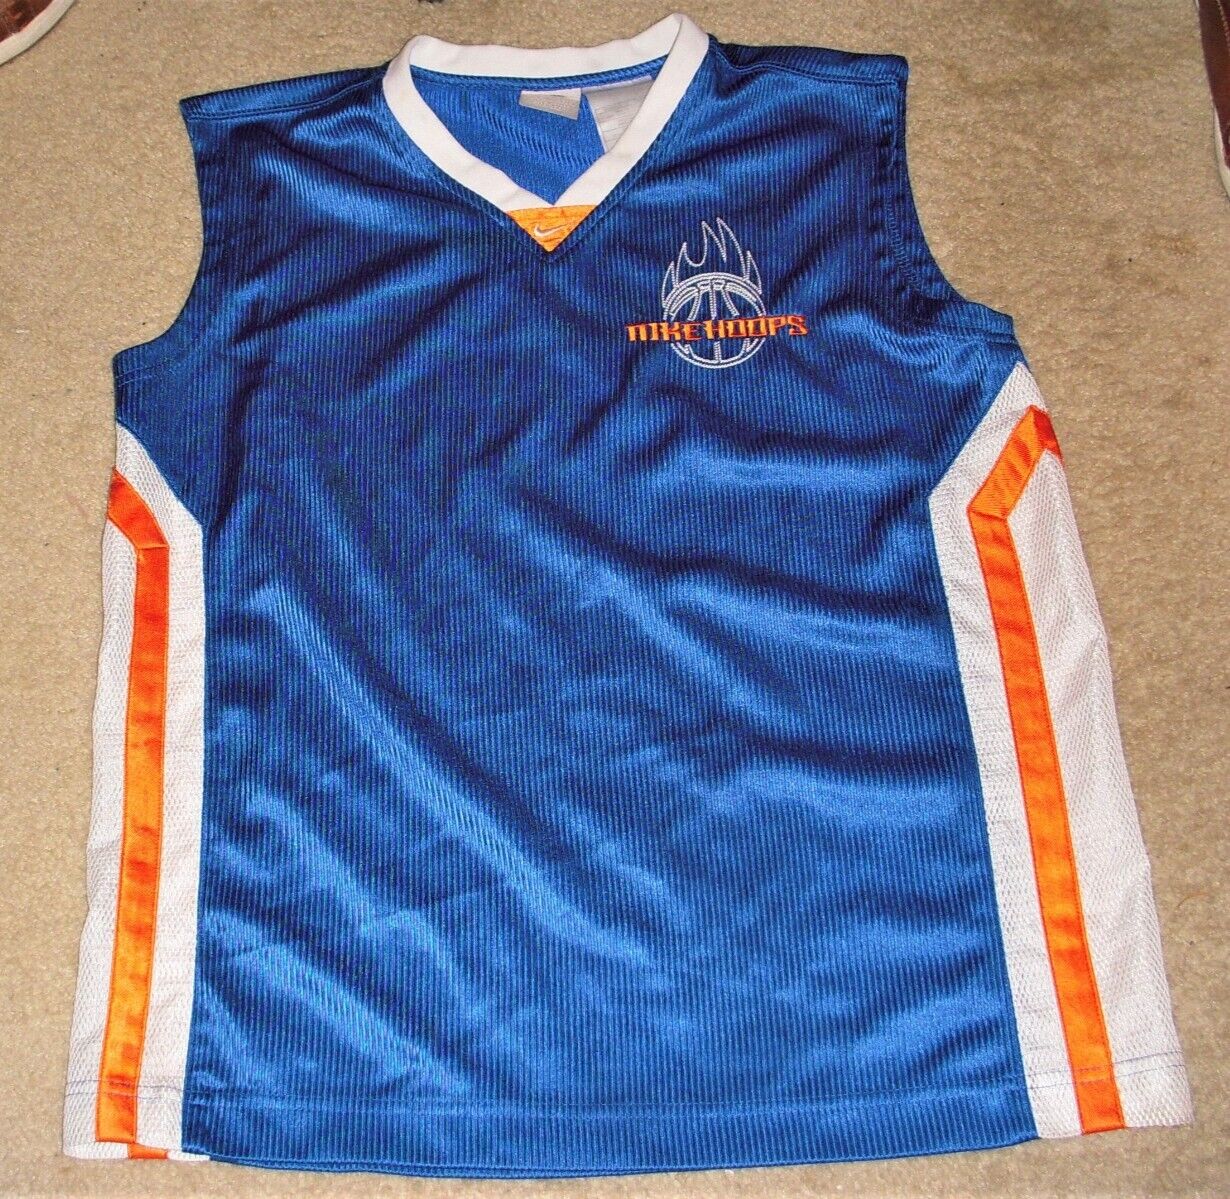 Nike Hoops Youth Basketball Jersey Blue Orange Embroidered Size XL 18-20